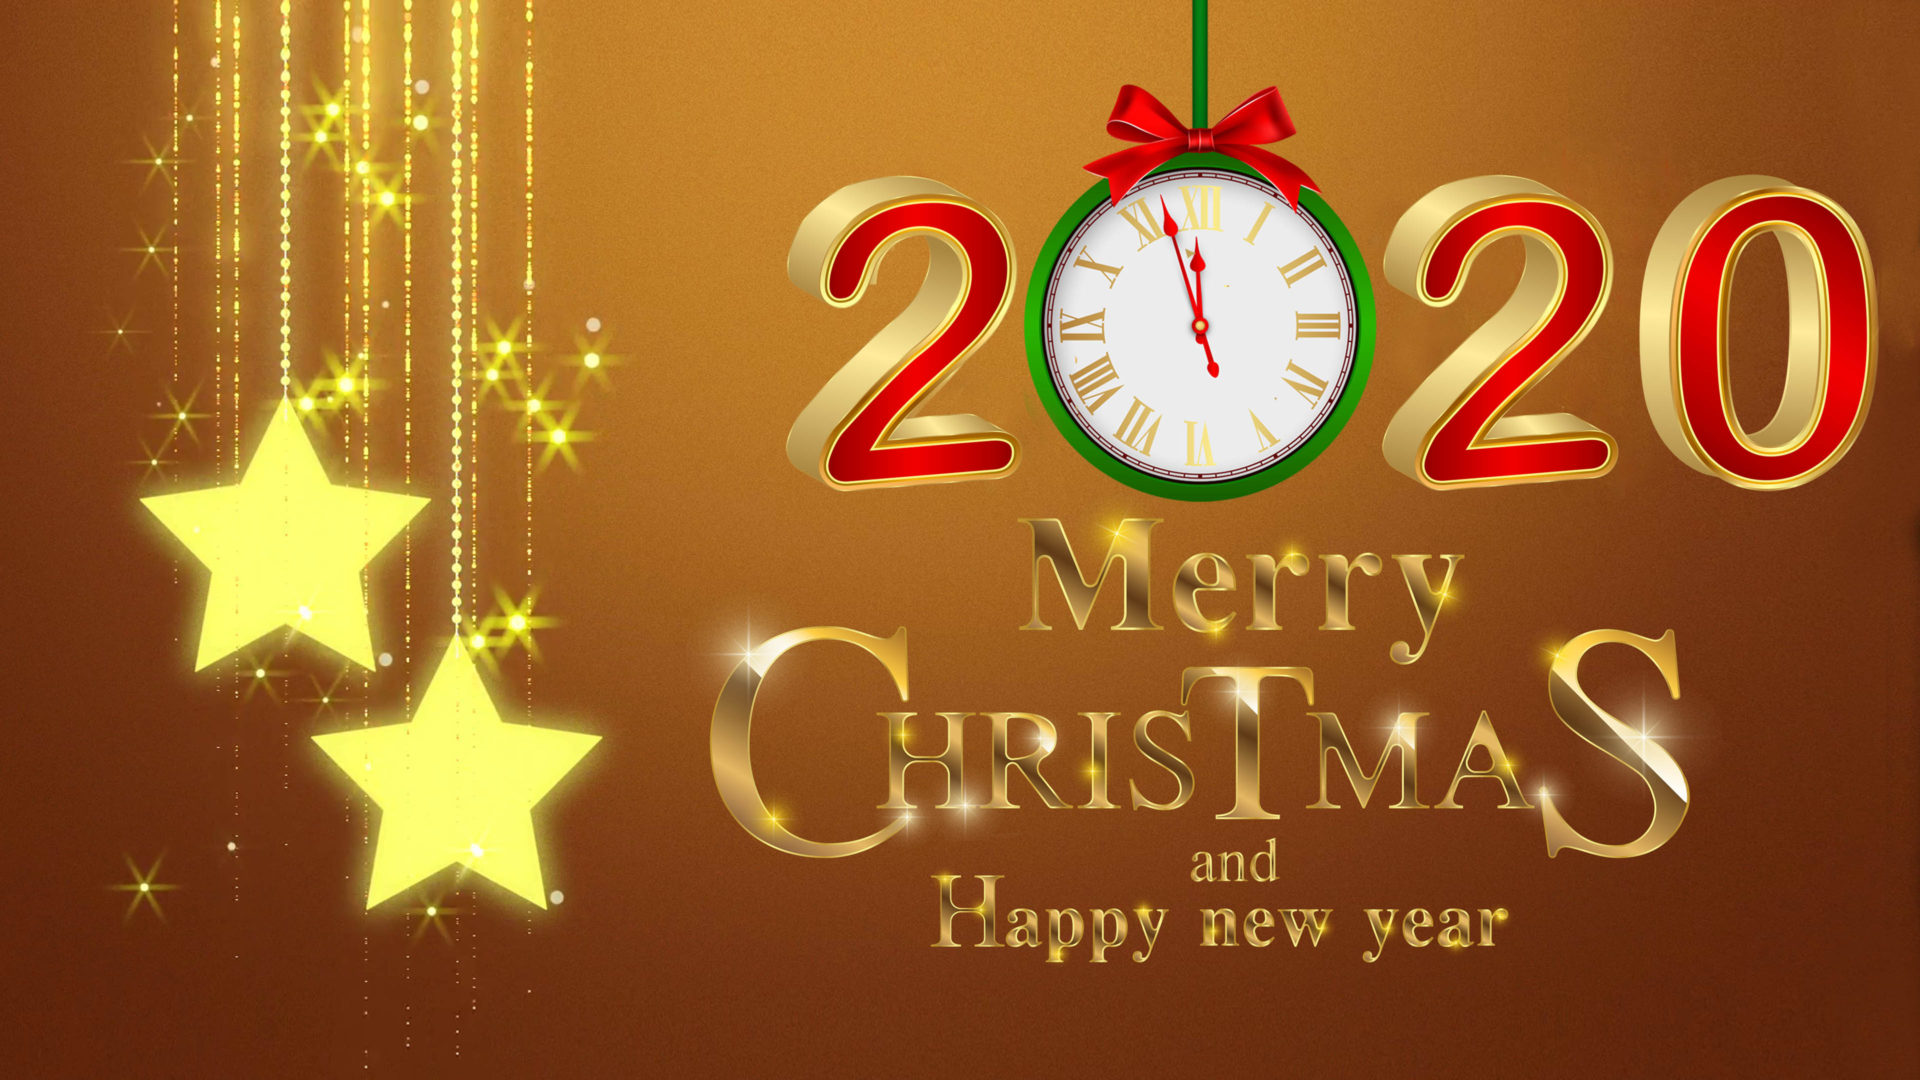 Merry Christmas And Happy New Year 2020 Gold 4k Ultra Hd Desktop